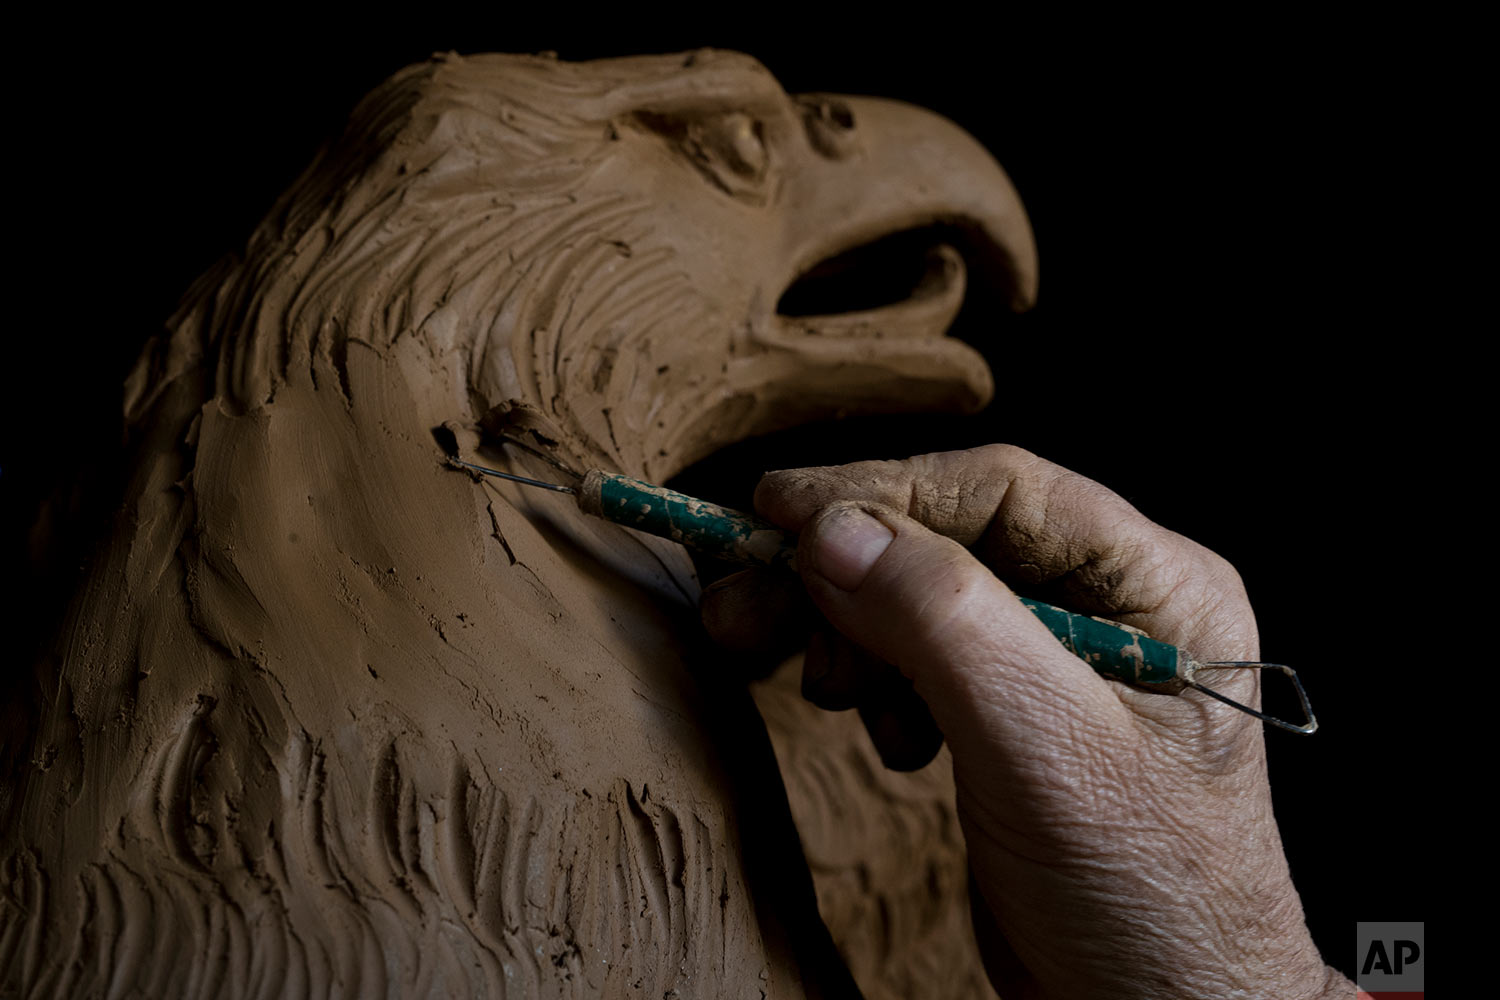  In this Tuesday, Nov. 14, 2017 photo, sculptor and ceramicist Haralambos Goumas works on a terracotta eagle, at his workshop, in the Egaleo suburb of Athens. (AP Photo/Petros Giannakouris) 